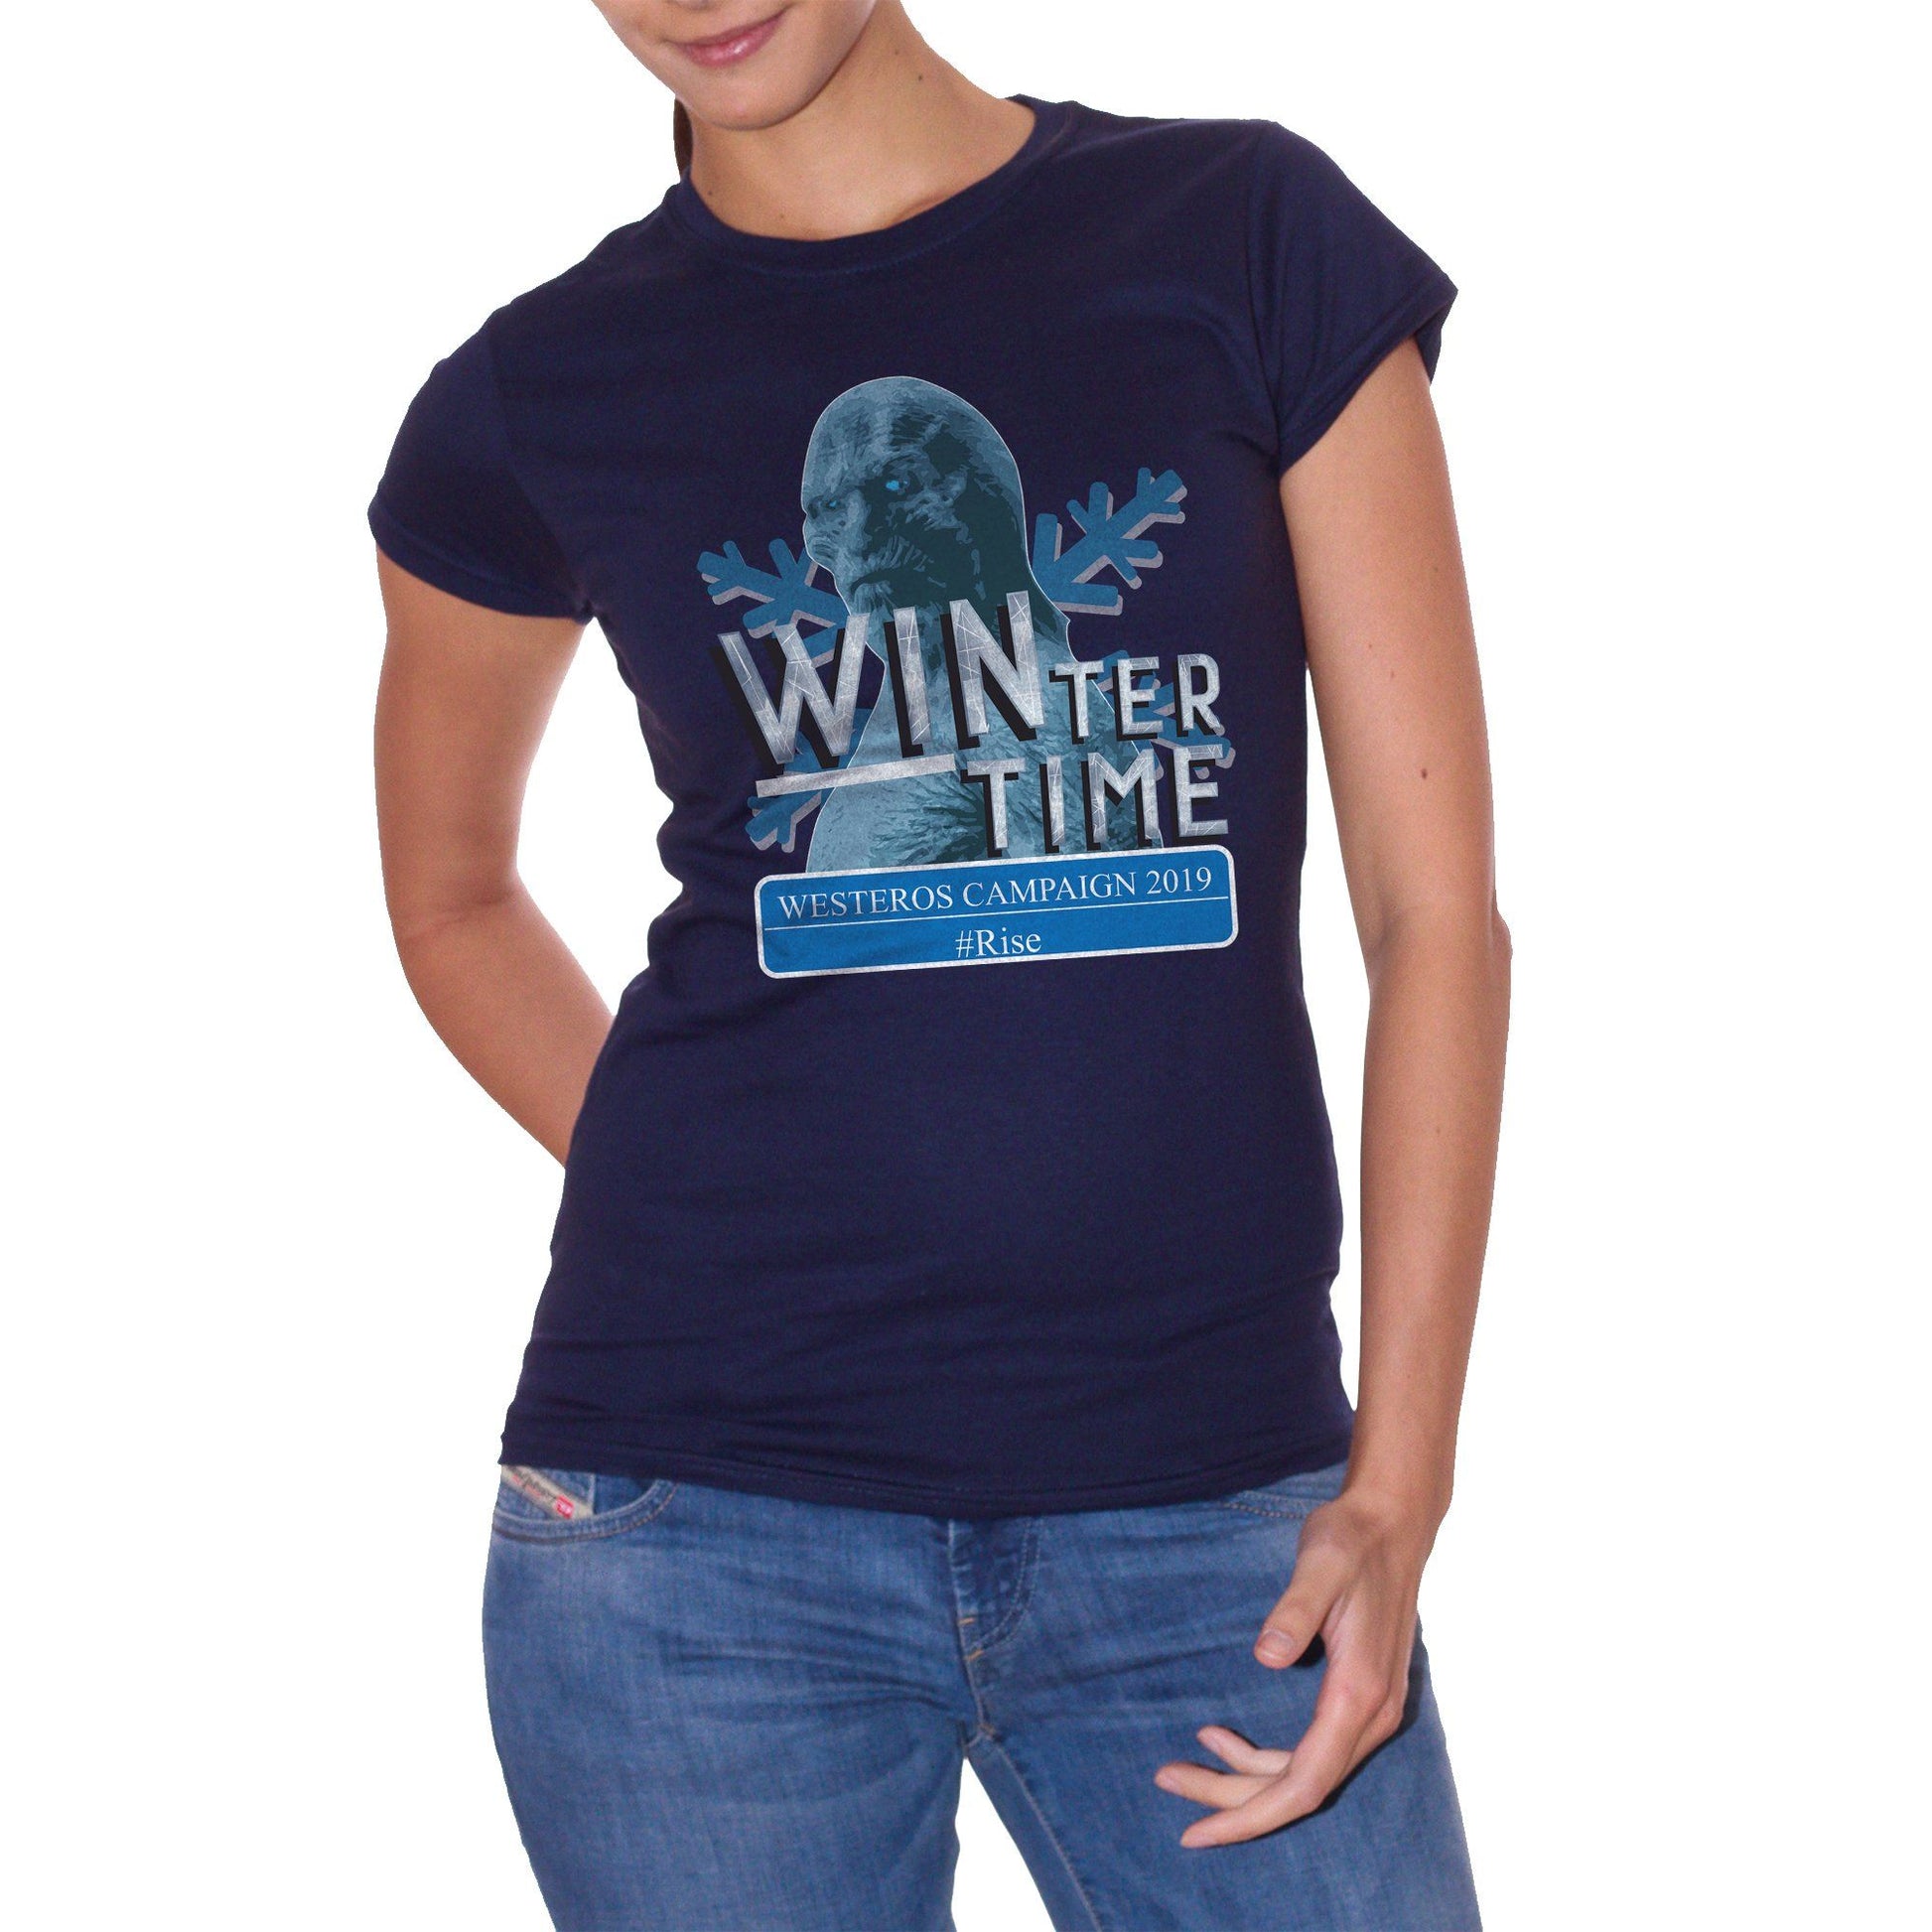 White T-Shirt White Walker Winter Westeros Campaign 2019 Game Of Thrones - FILM CucShop